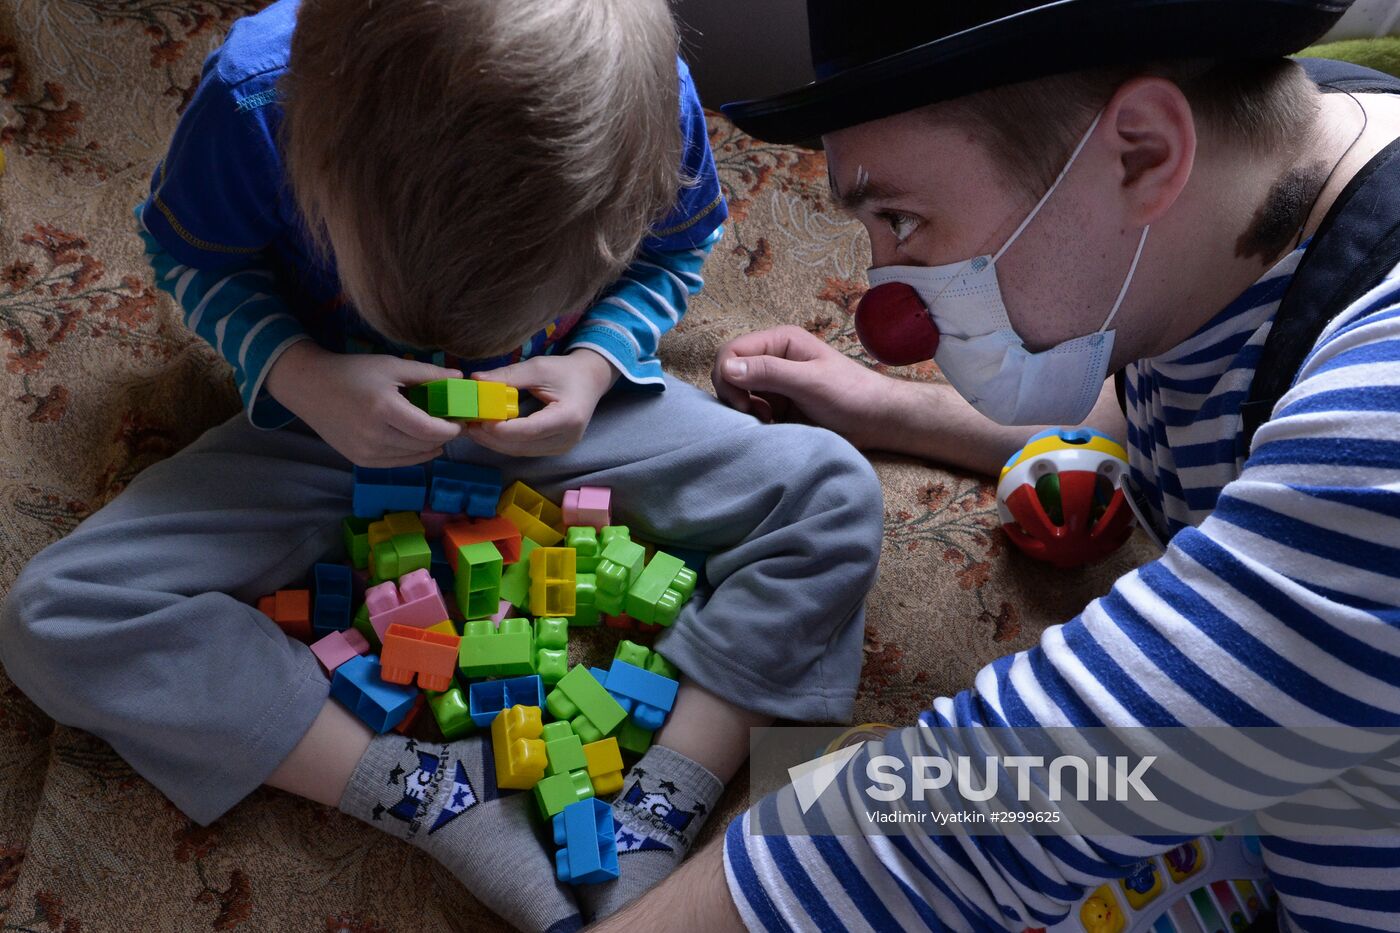 Doctor Clown at Russian Children's City Hospital